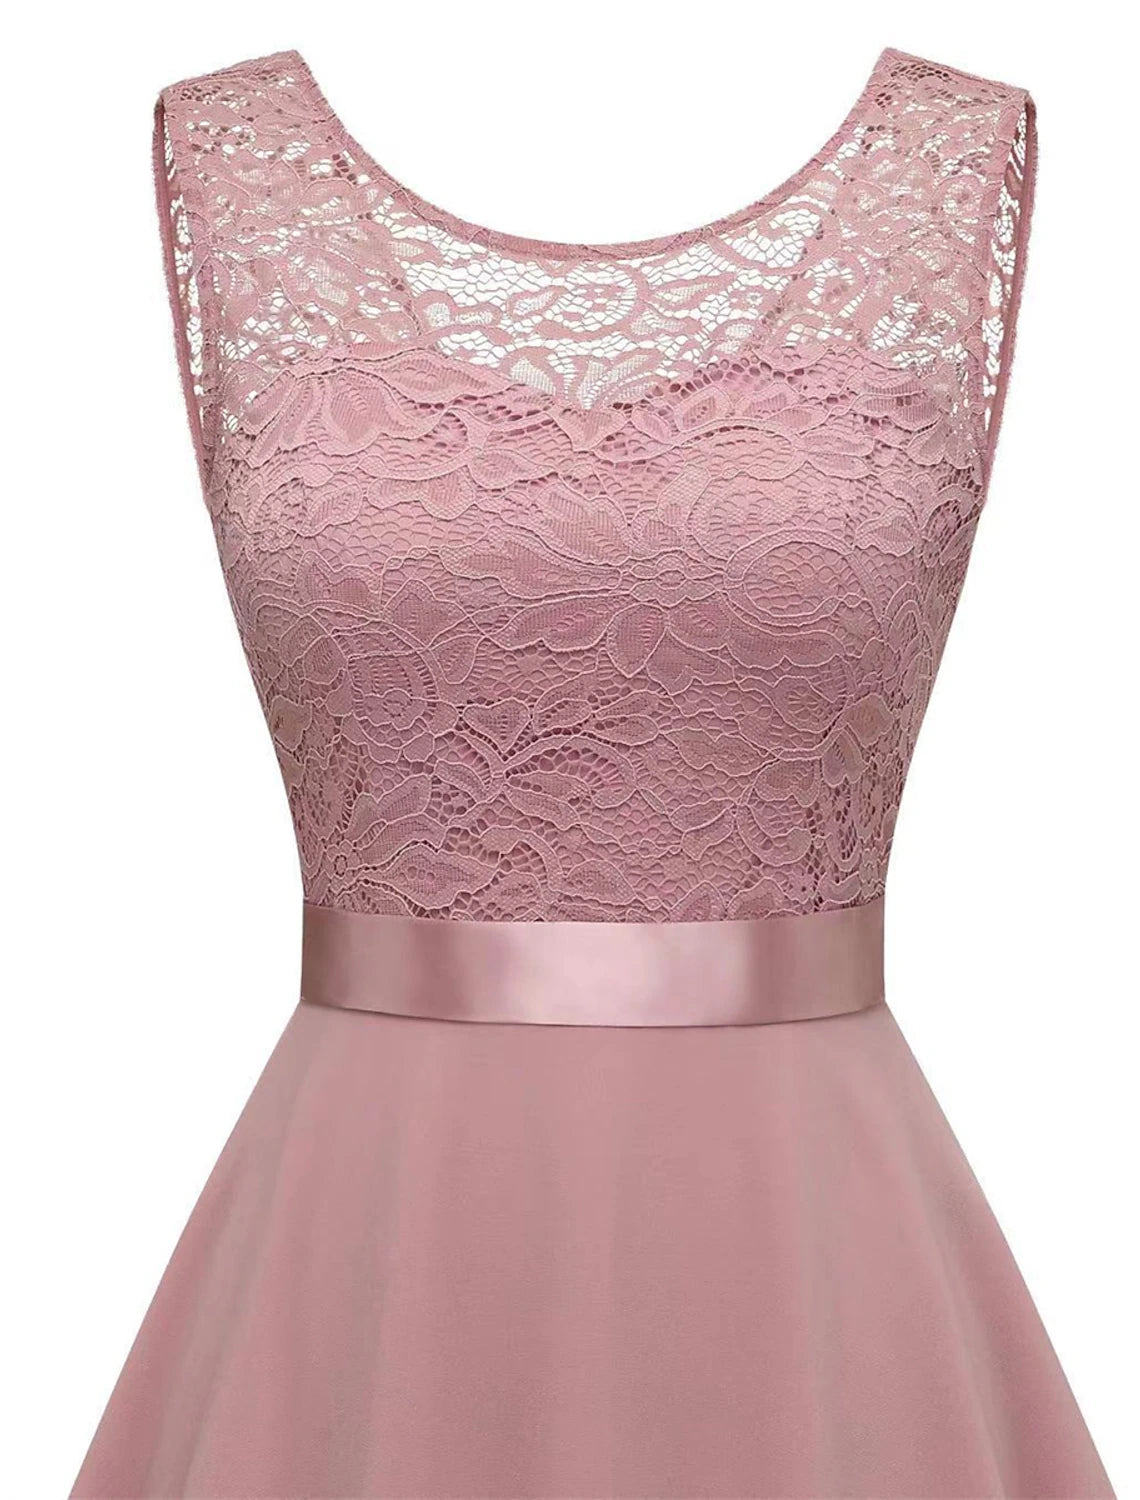 Women's Party Dress Lace Dress Homecoming Dress Midi Dress Pink Wine Blue Sleeveless Pure Color Lace Summer Spring Crew Neck Party Birthday Evening Party Wedding Guest